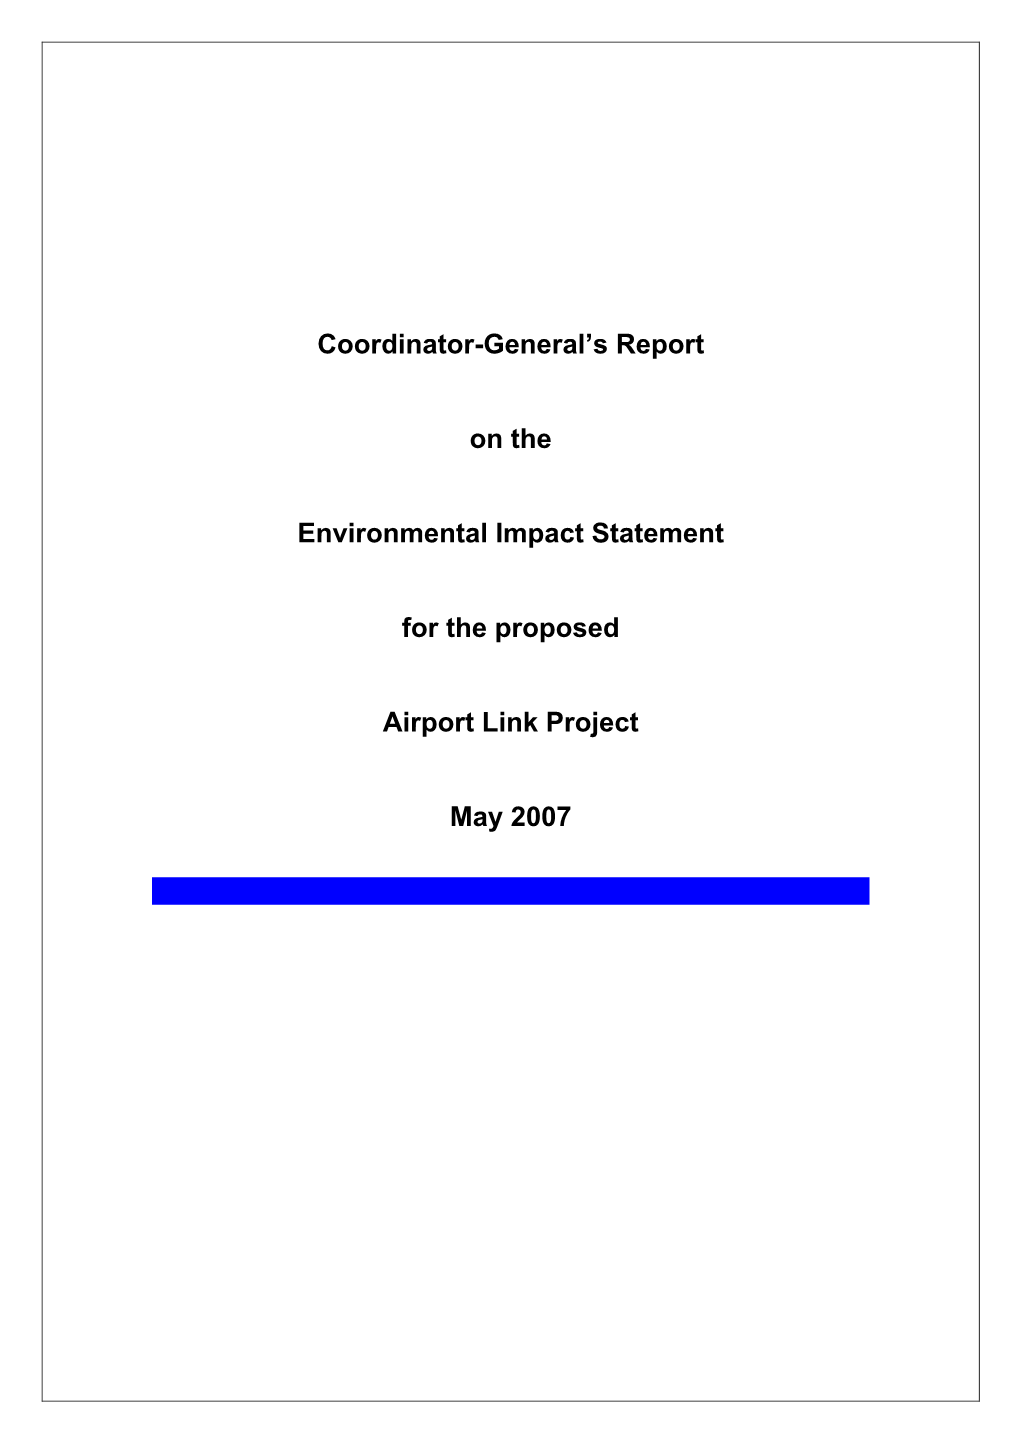 Coordinator-General's Report on the Environmental Impact Statement For